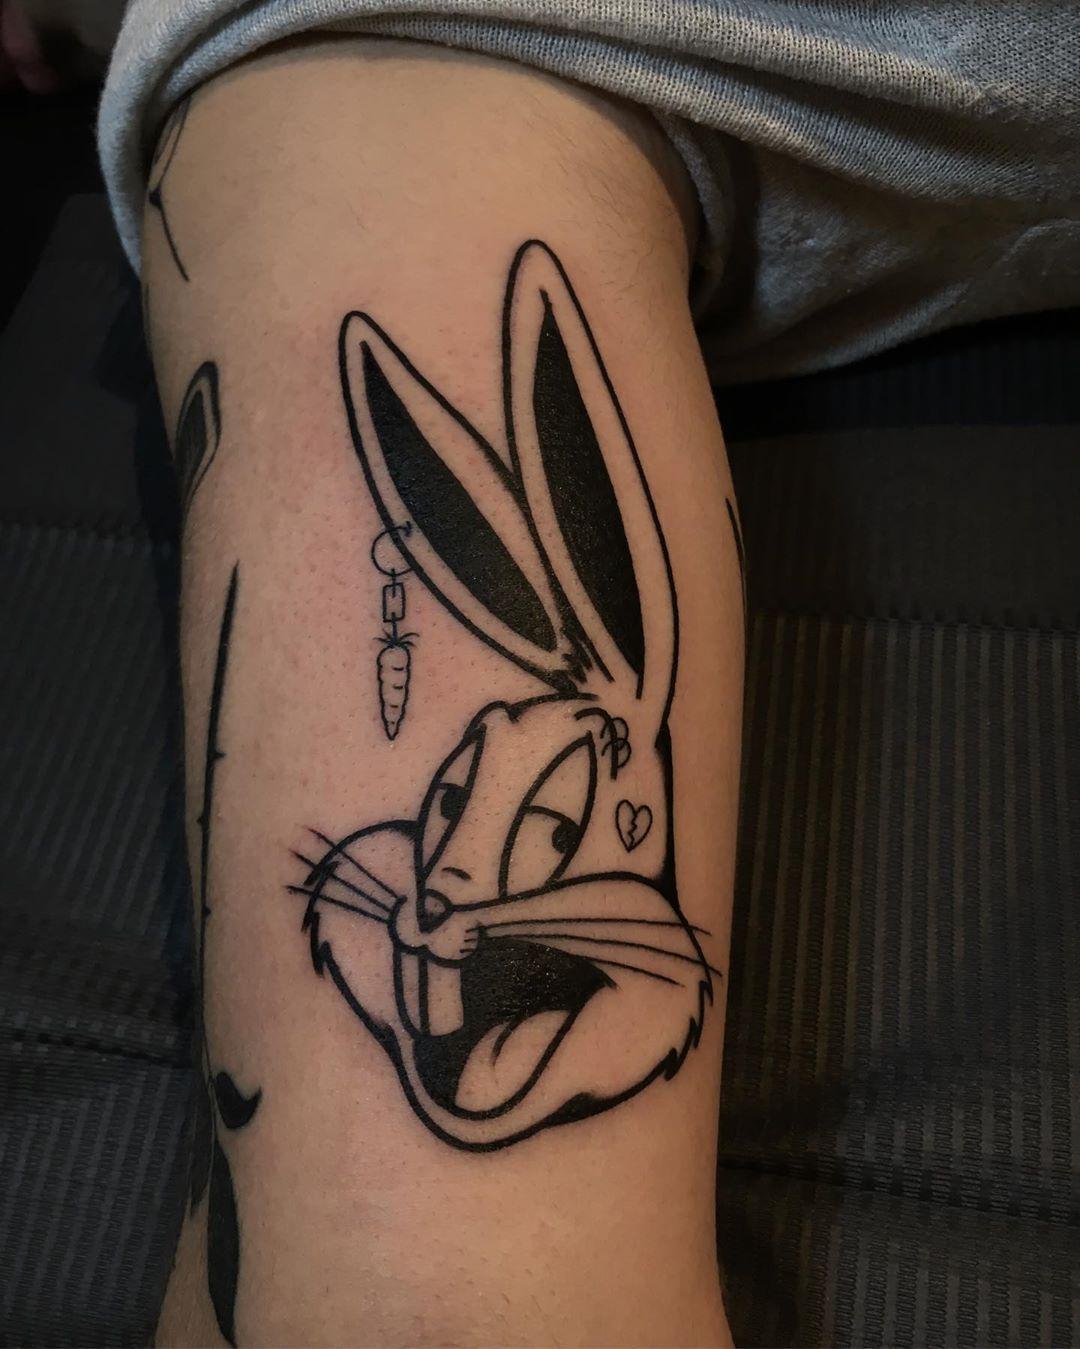 Bugs Bunny tattoo by @tototatuer